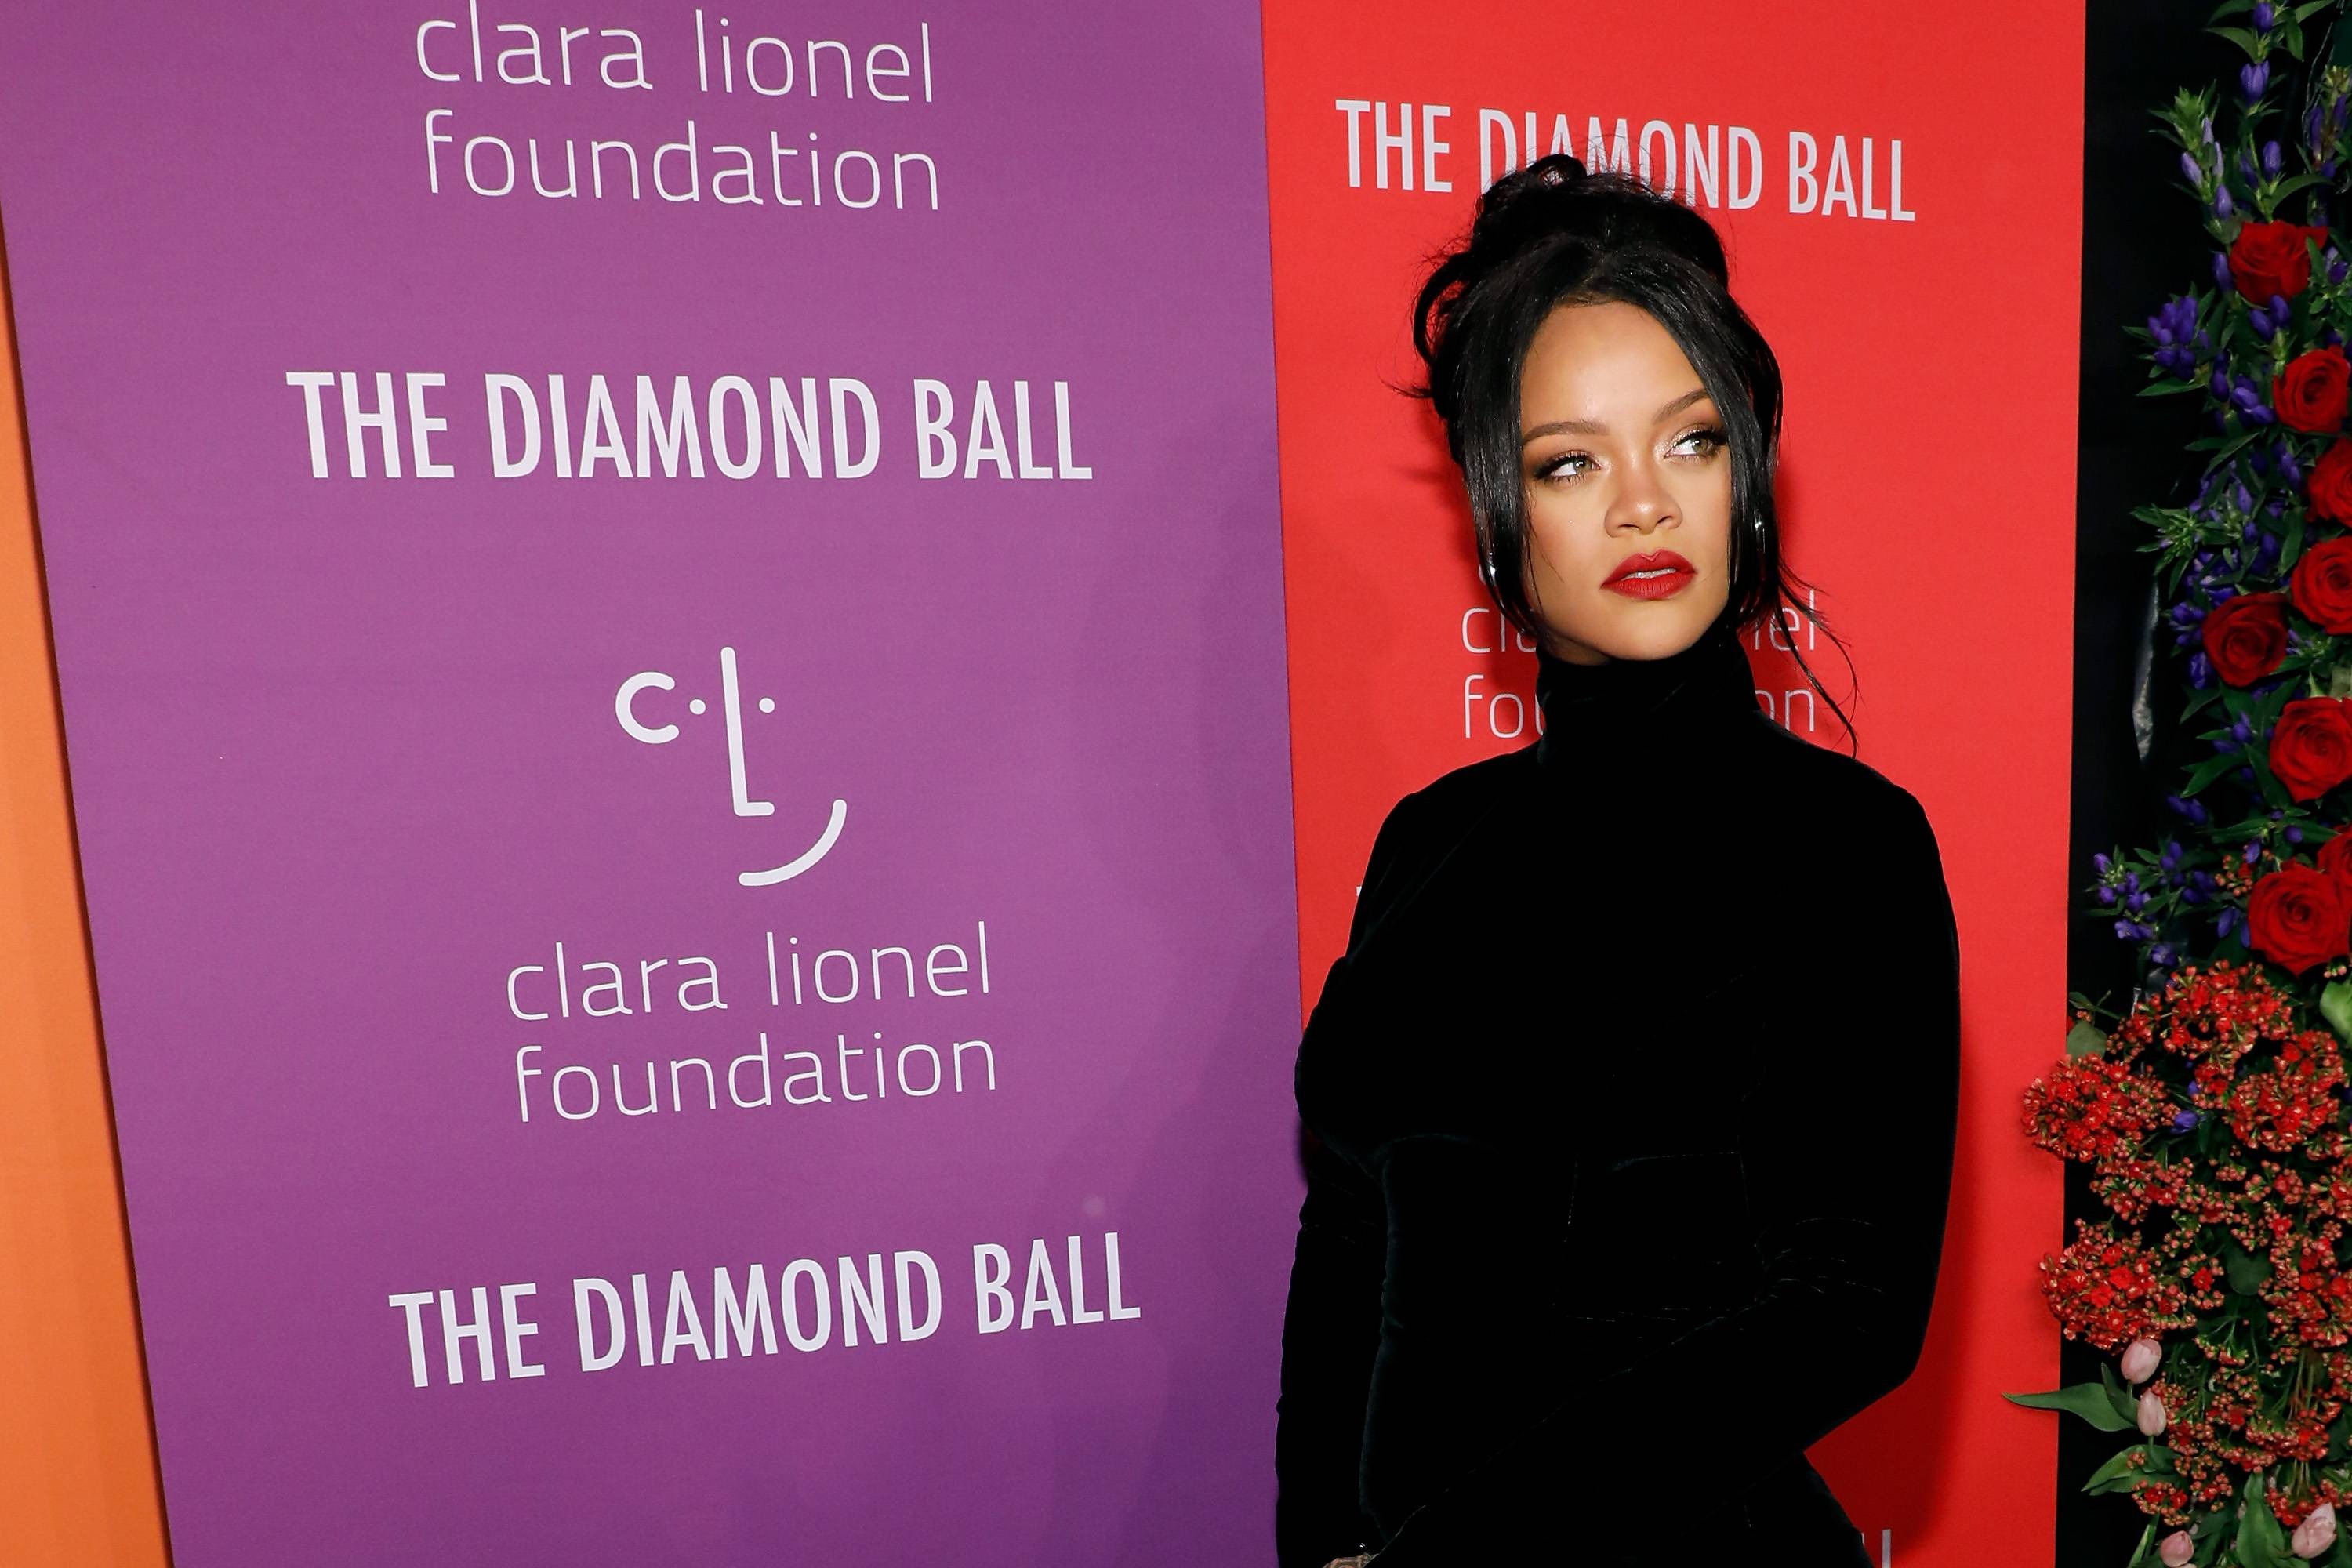 NEW YORK, NEW YORK - SEPTEMBER 12: Rihanna attends the 5th Annual Diamond Ball benefiting the Clara Lionel Foundation at Cipriani Wall Street on September 12, 2019 in New York City. (Photo by Taylor Hill/WireImage)